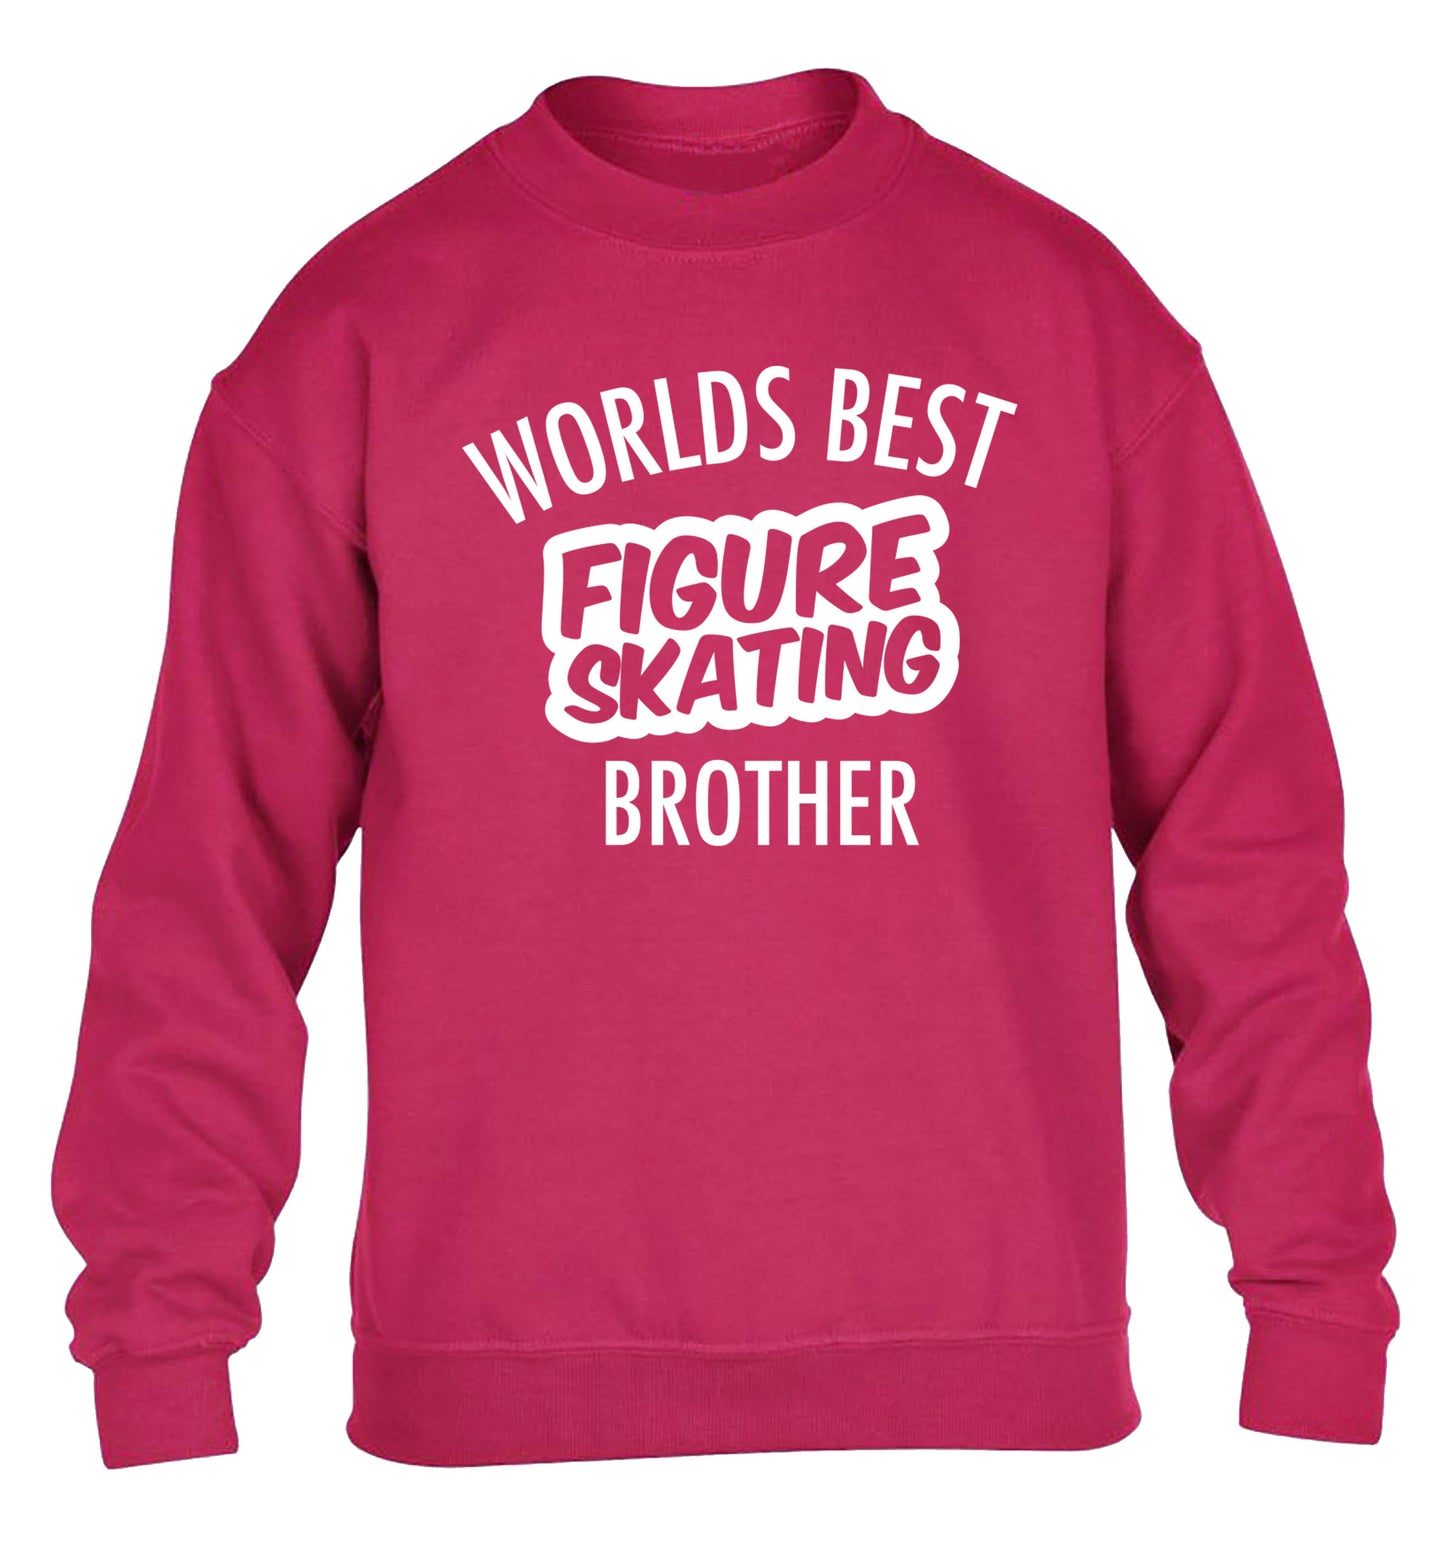 Worlds best figure skating brother children's pink sweater 12-14 Years